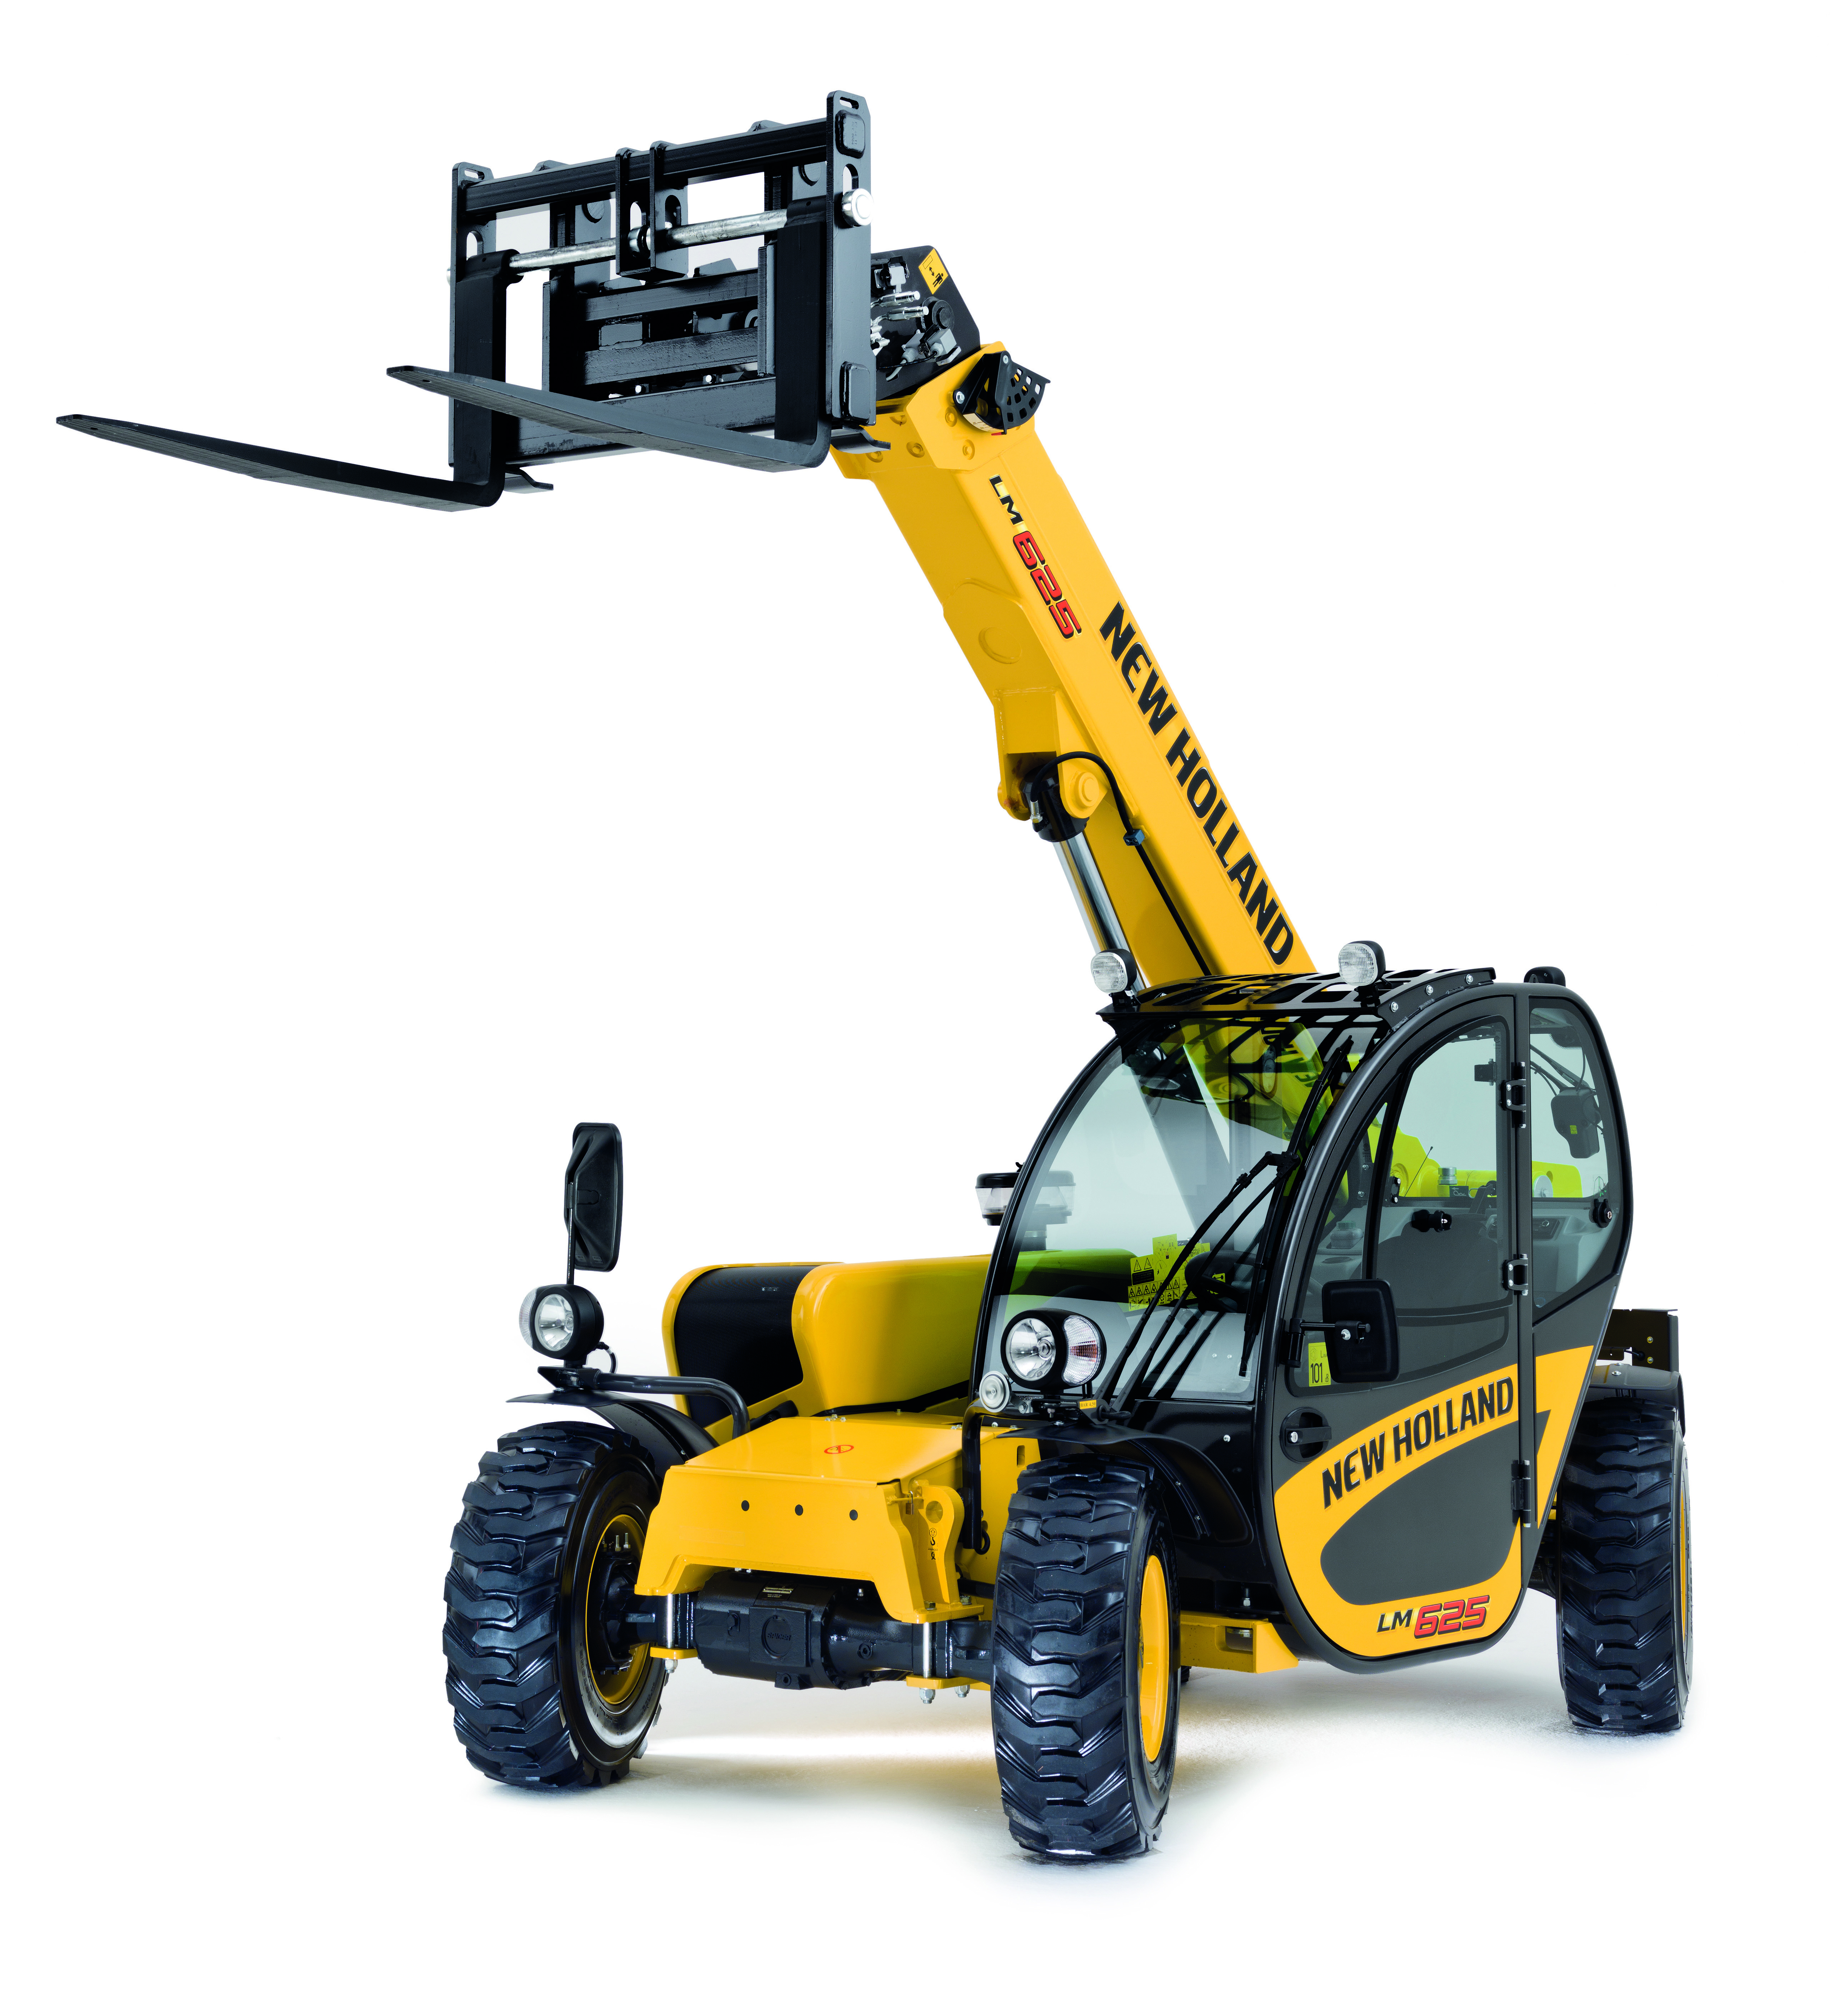 NEW HOLLAND'S NEW TELEHANDLER TAKES PERFORMANCE TO NEW HEIGHTS ...